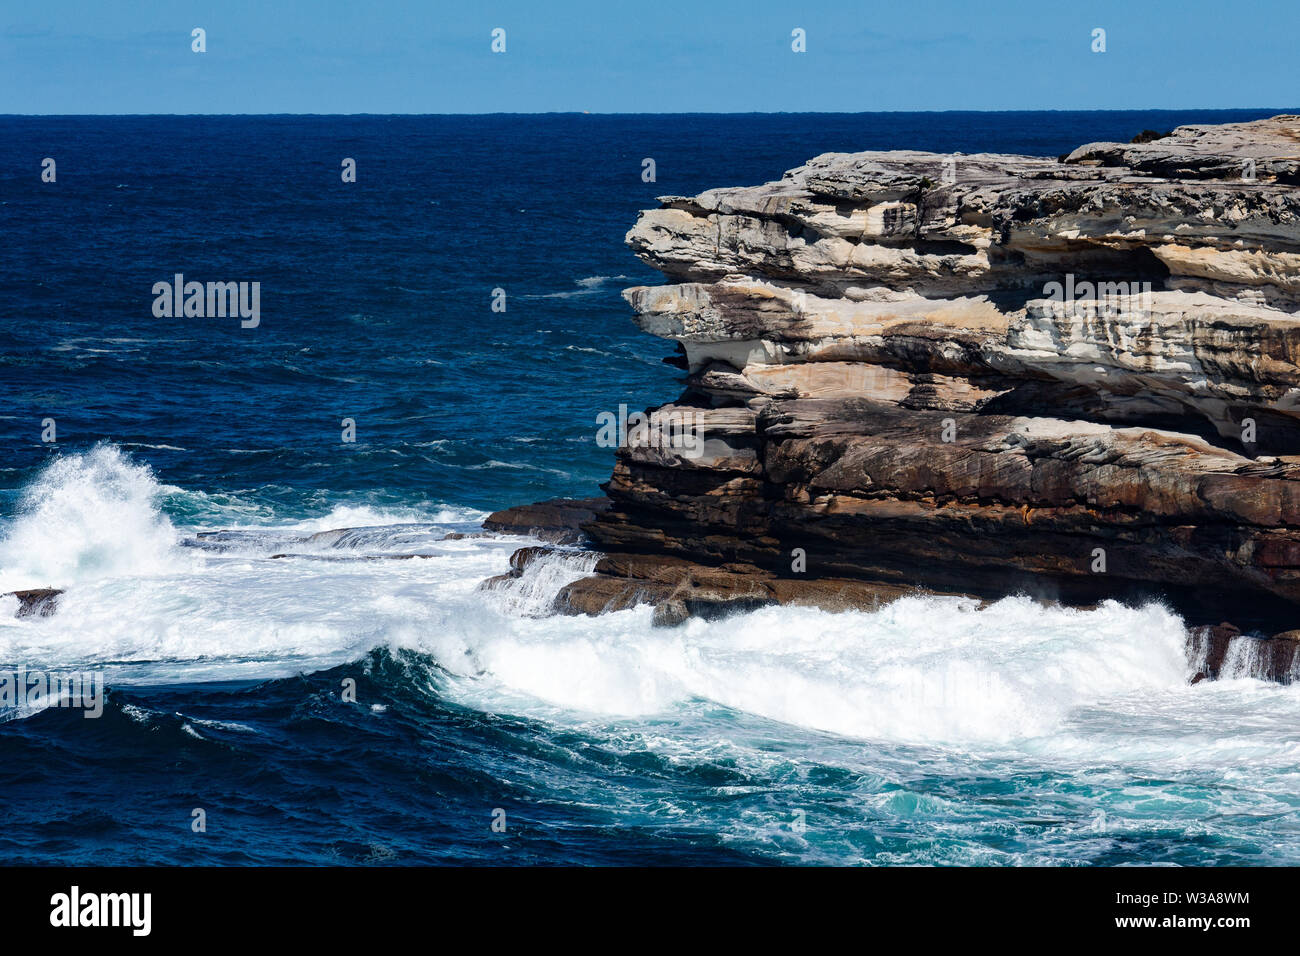 Oceanside rocky sandstone cliff with blue sea water waves creating whitewash against coastline and clear sky in background Stock Photo